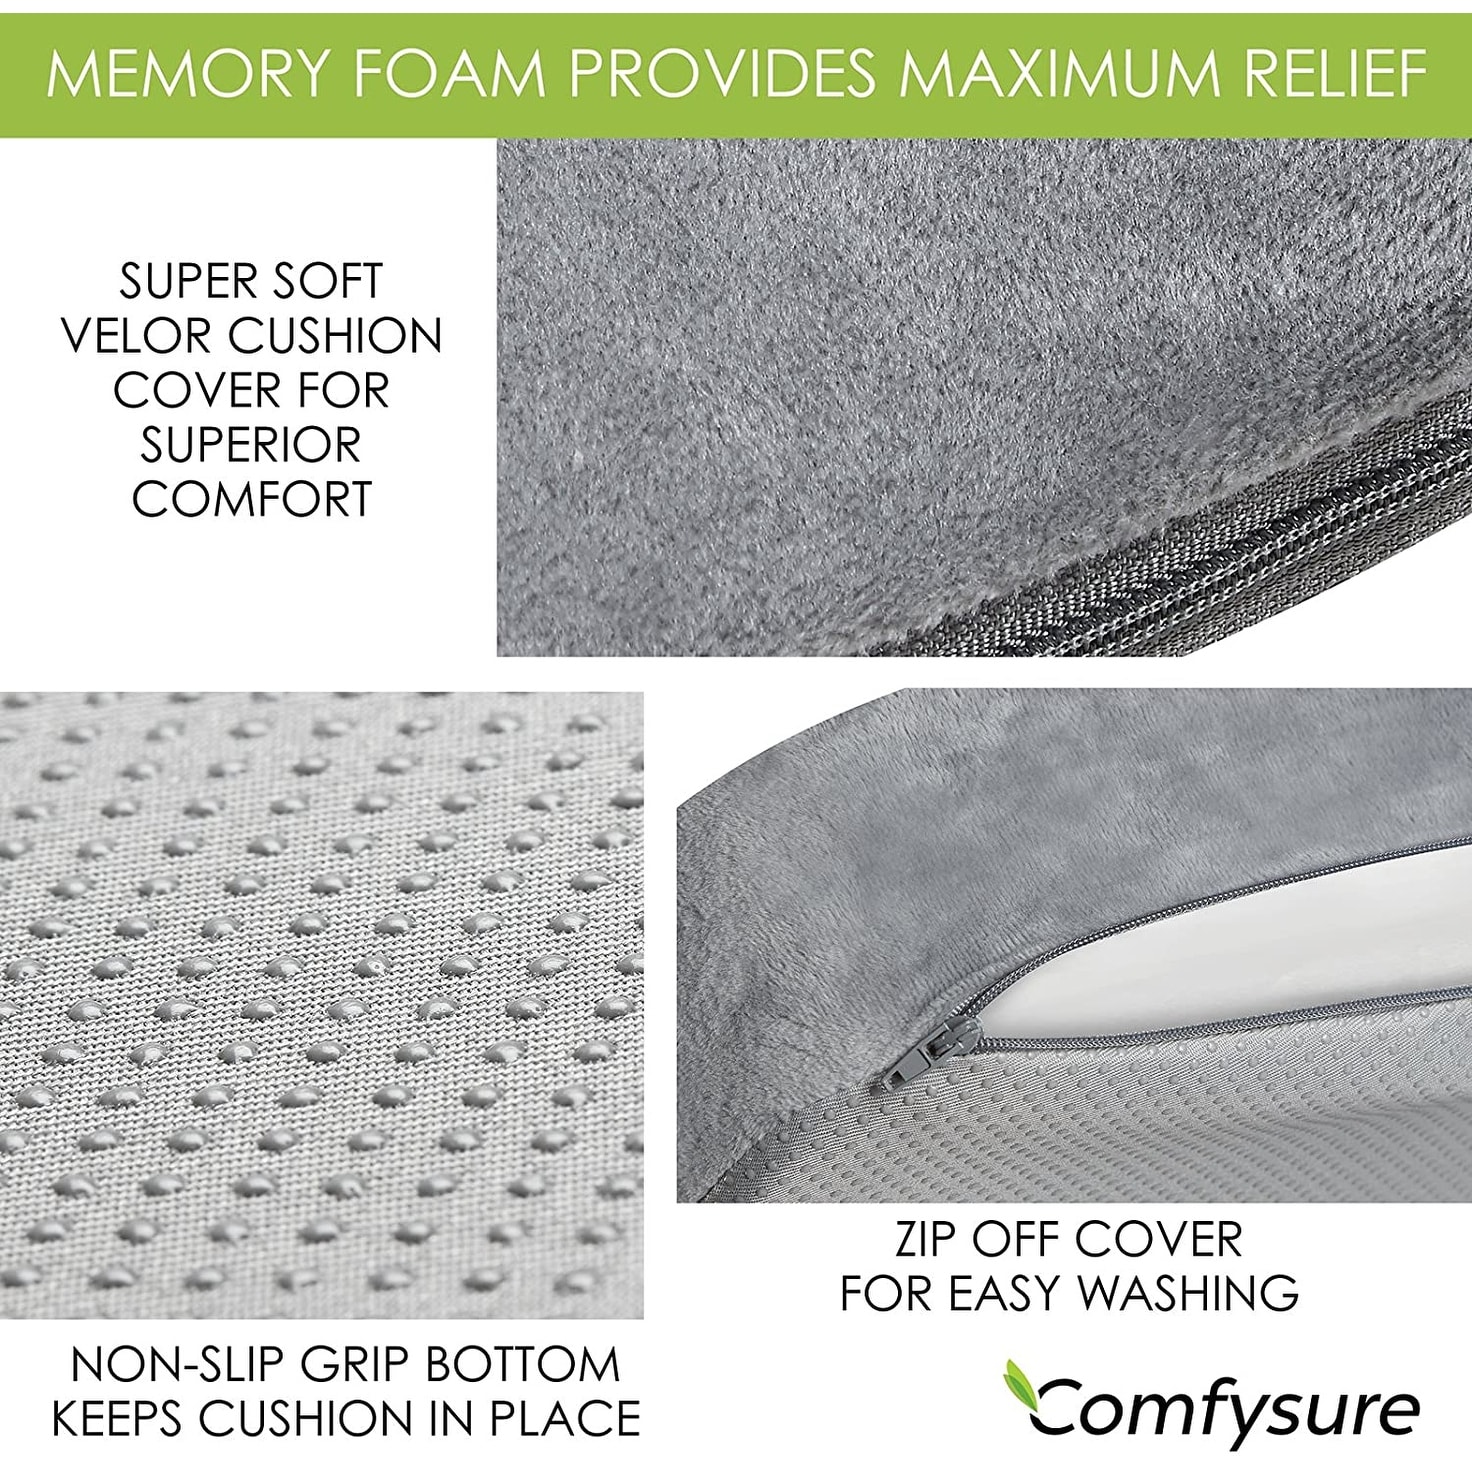 Car Seat Wedge Pillow - Memory Foam Firm Cushion - Orthopedic Support and Pain Relief for Lower Back, Size: 13.8â ³X15.8â ³X3.1, Black